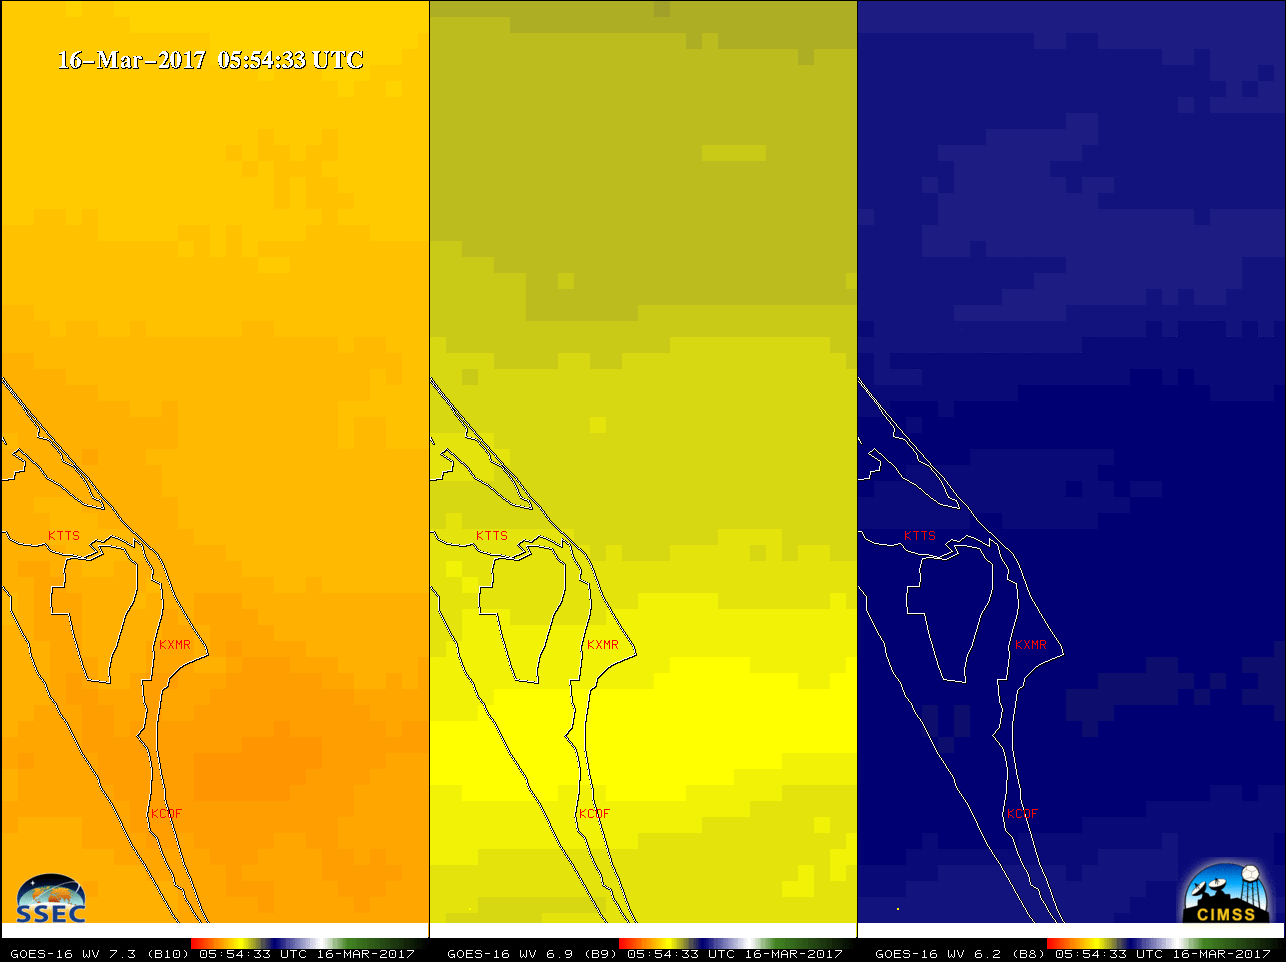 GOES-16 Lower-Level Water Vapor (7.3 µm, left), Mid-Level Water Vapor (6.9 µm, middle) and Upper-Level Water Vapor (6.2 µm, right) images [click to enlarge] 